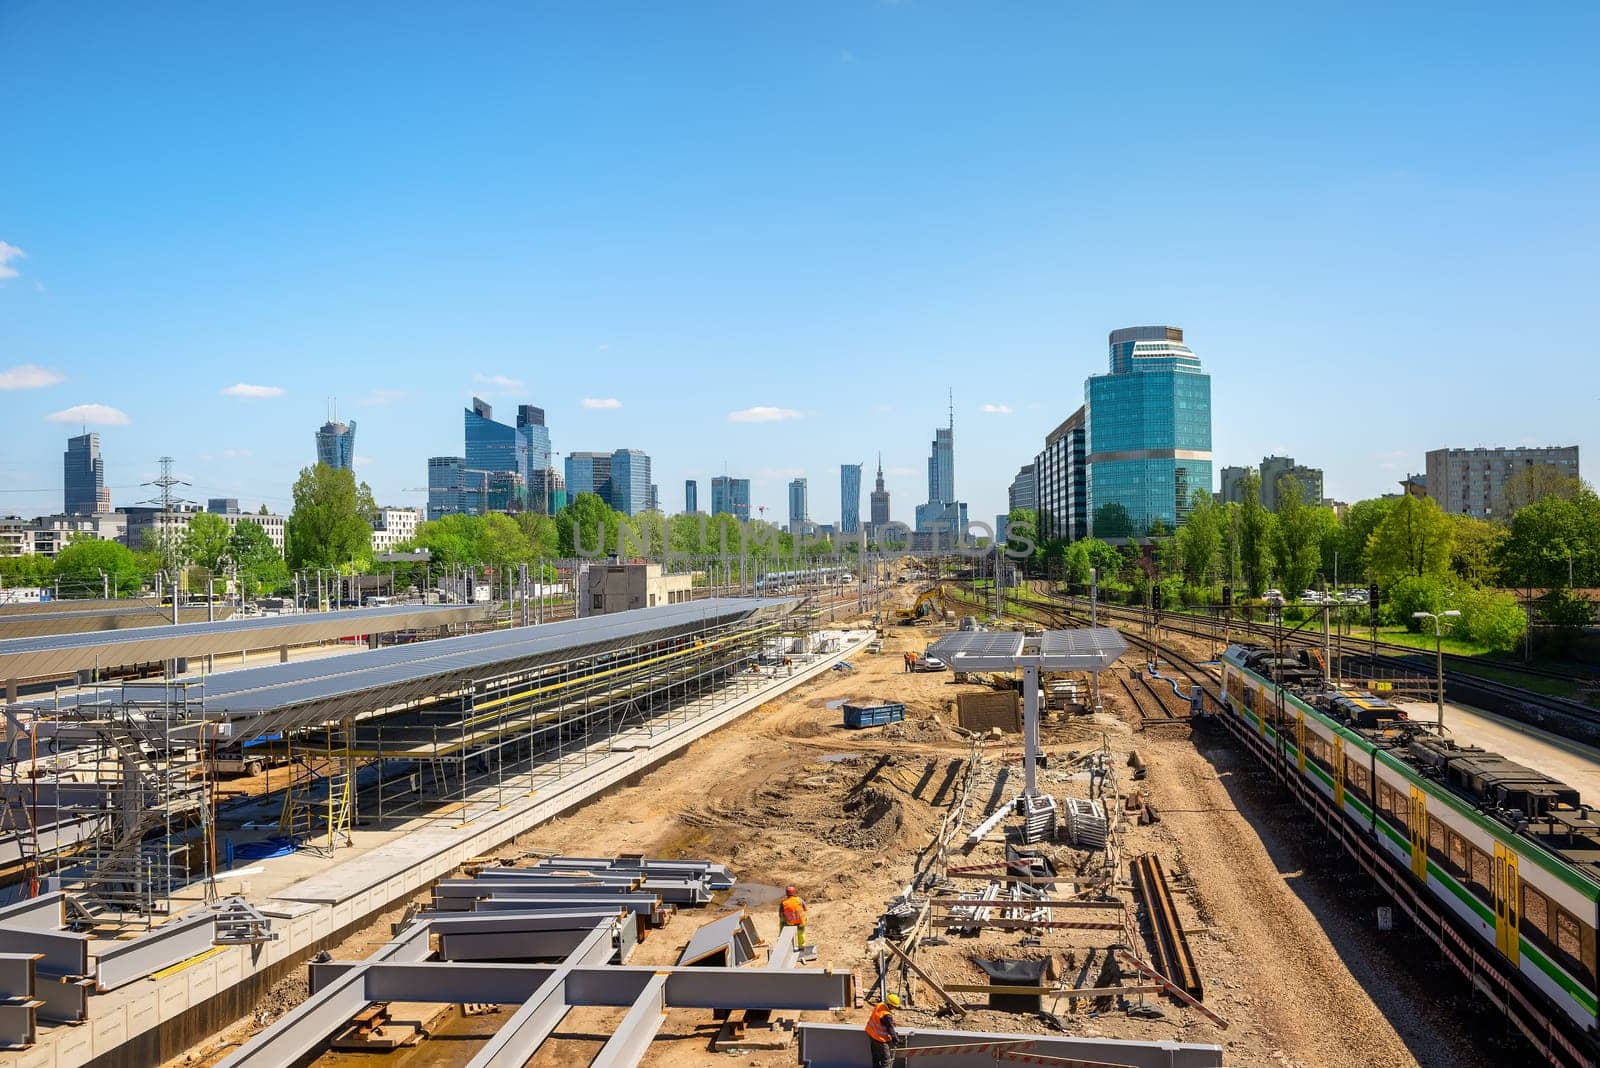 Construction at Warsaw West railway station in Warsaw